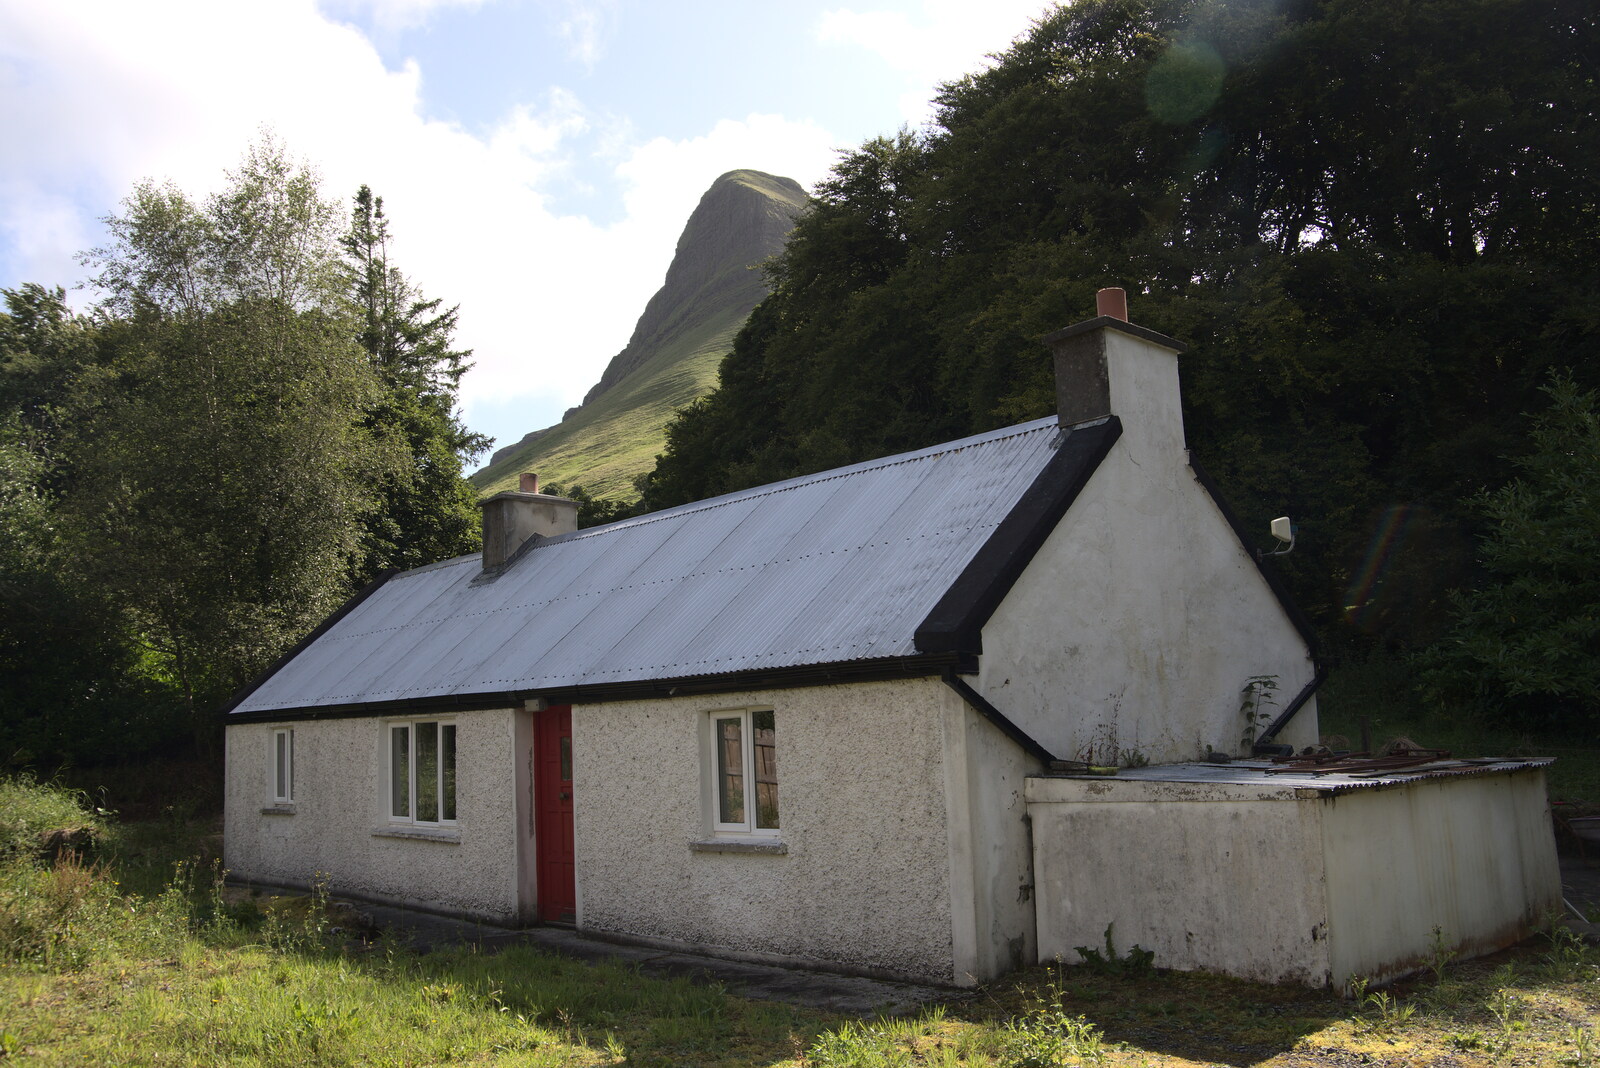 A cottage at the base of Benbulben from Walks Around Benbulben and Carrowmore, County Sligo, Ireland - 13th August 2021